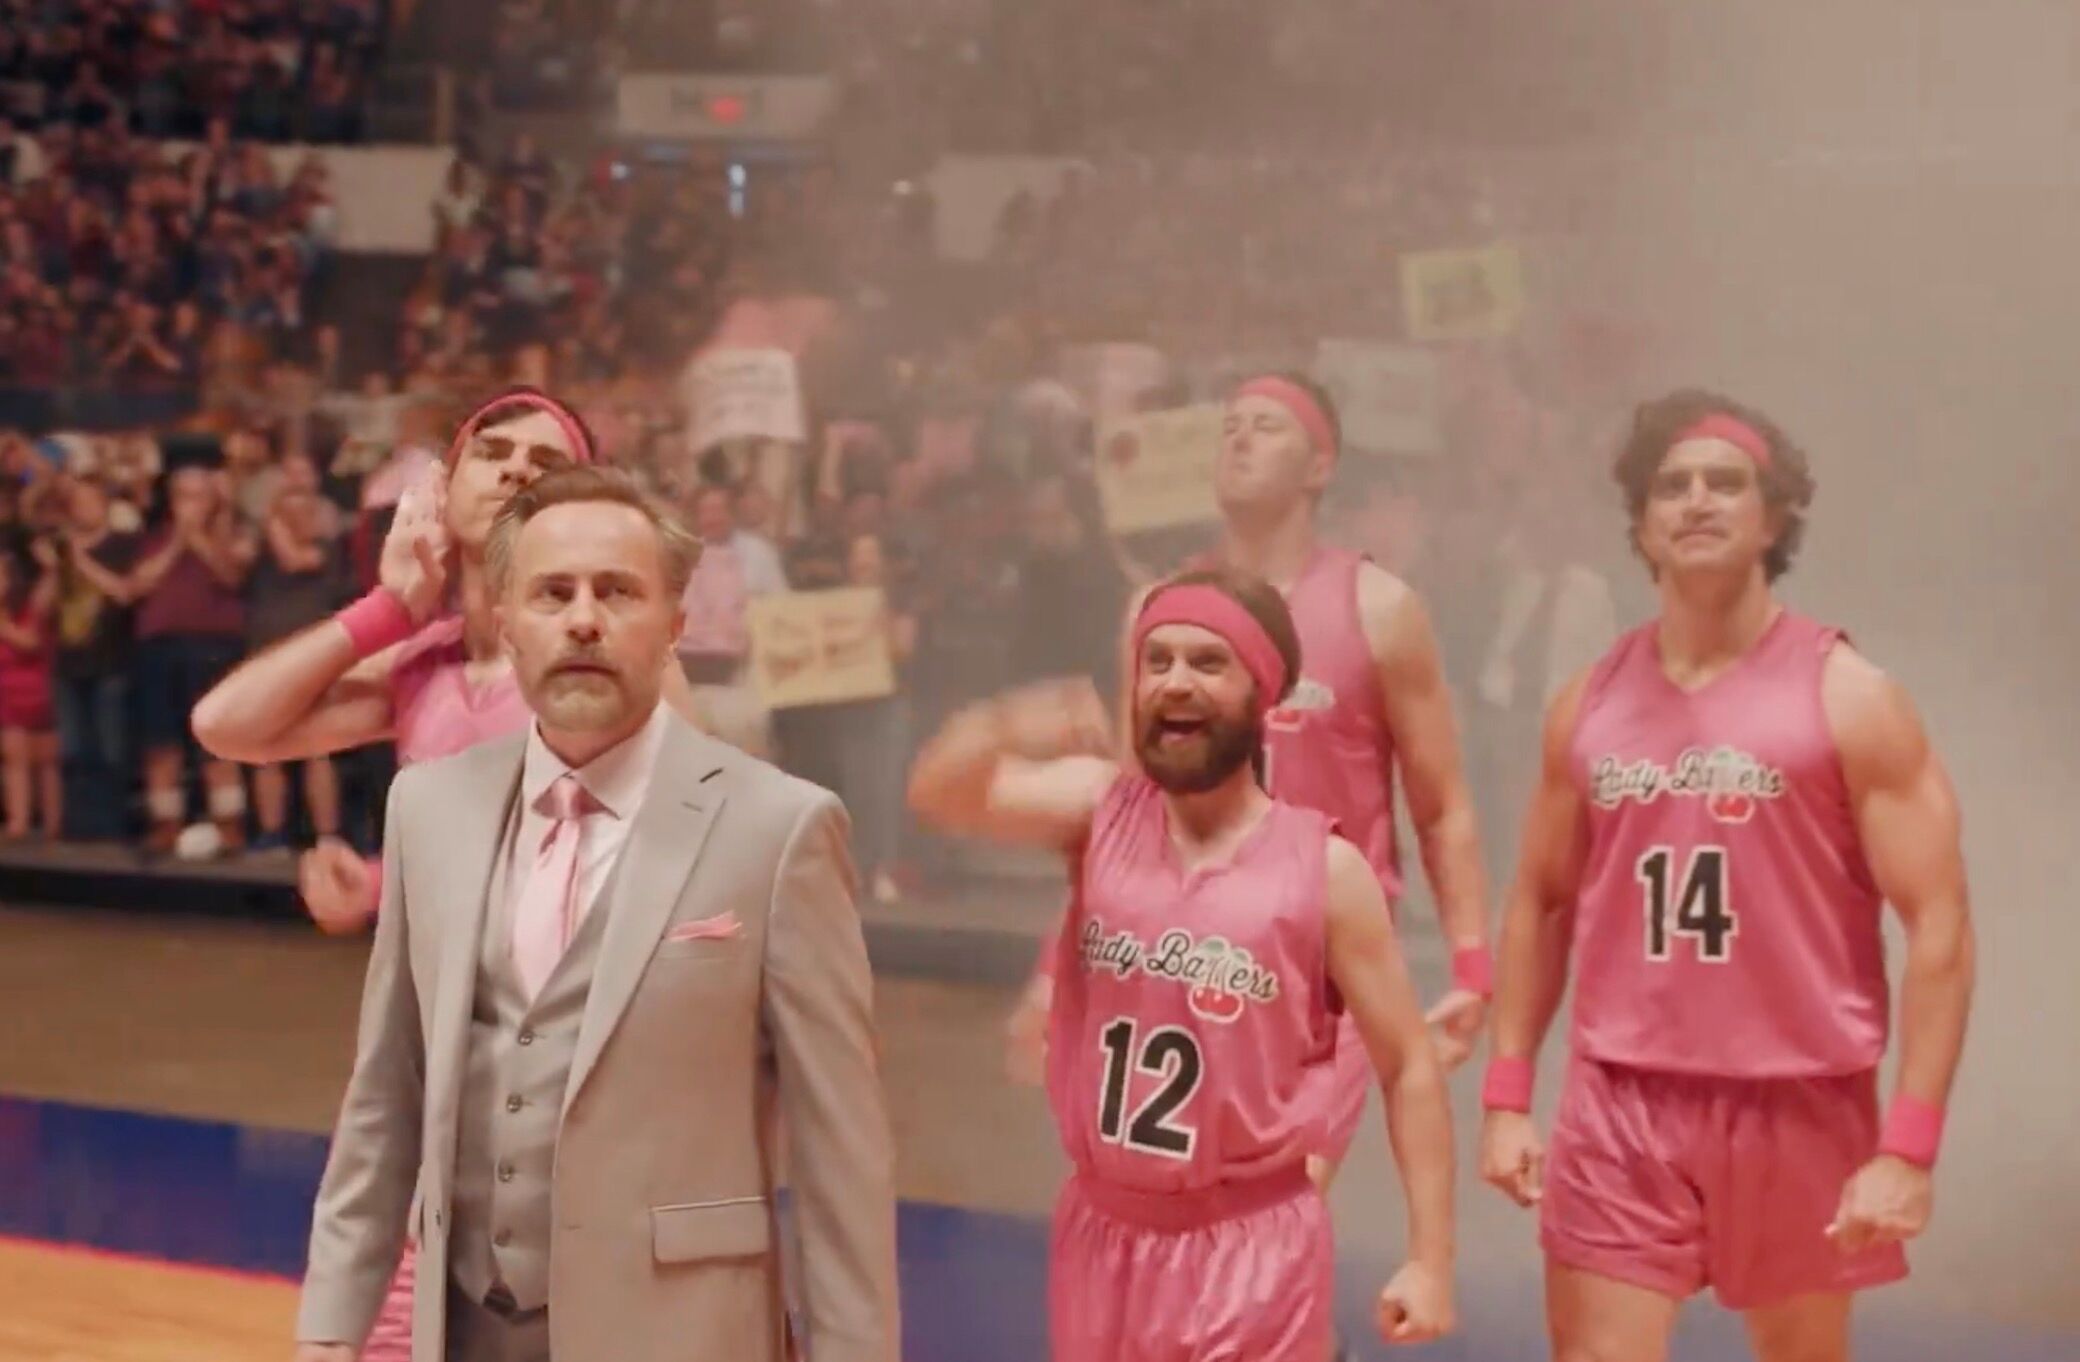 Scene from Lady Ballers: Group of cis men in pink jerseys pretending to be trans women walk out onto a basketball court